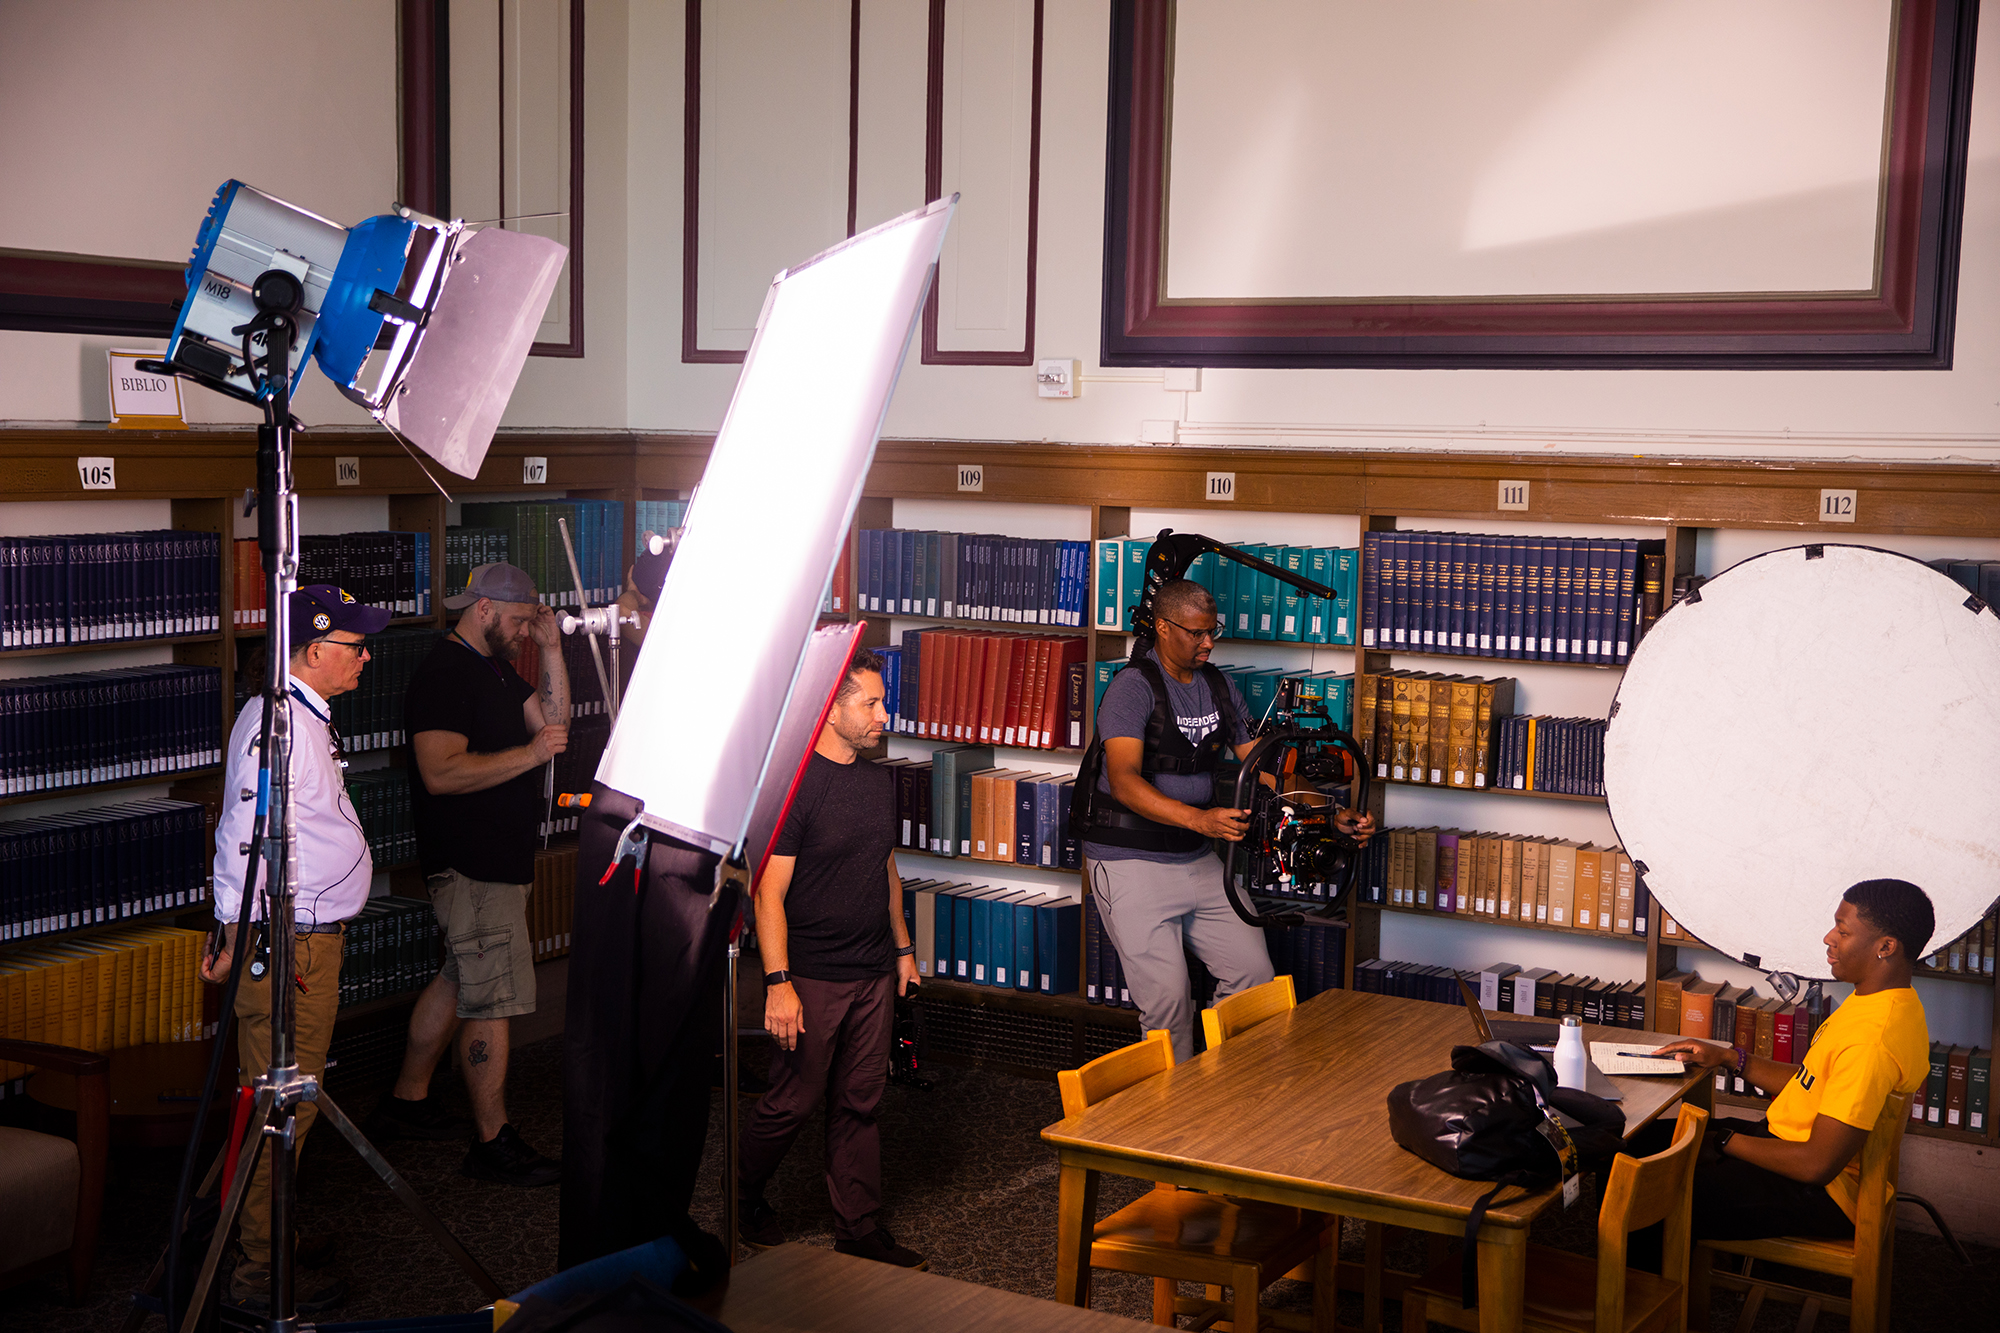 Iconic locations all over campus were used in filming. Here, Haughton gets ready for a close-up in Ellis Library.